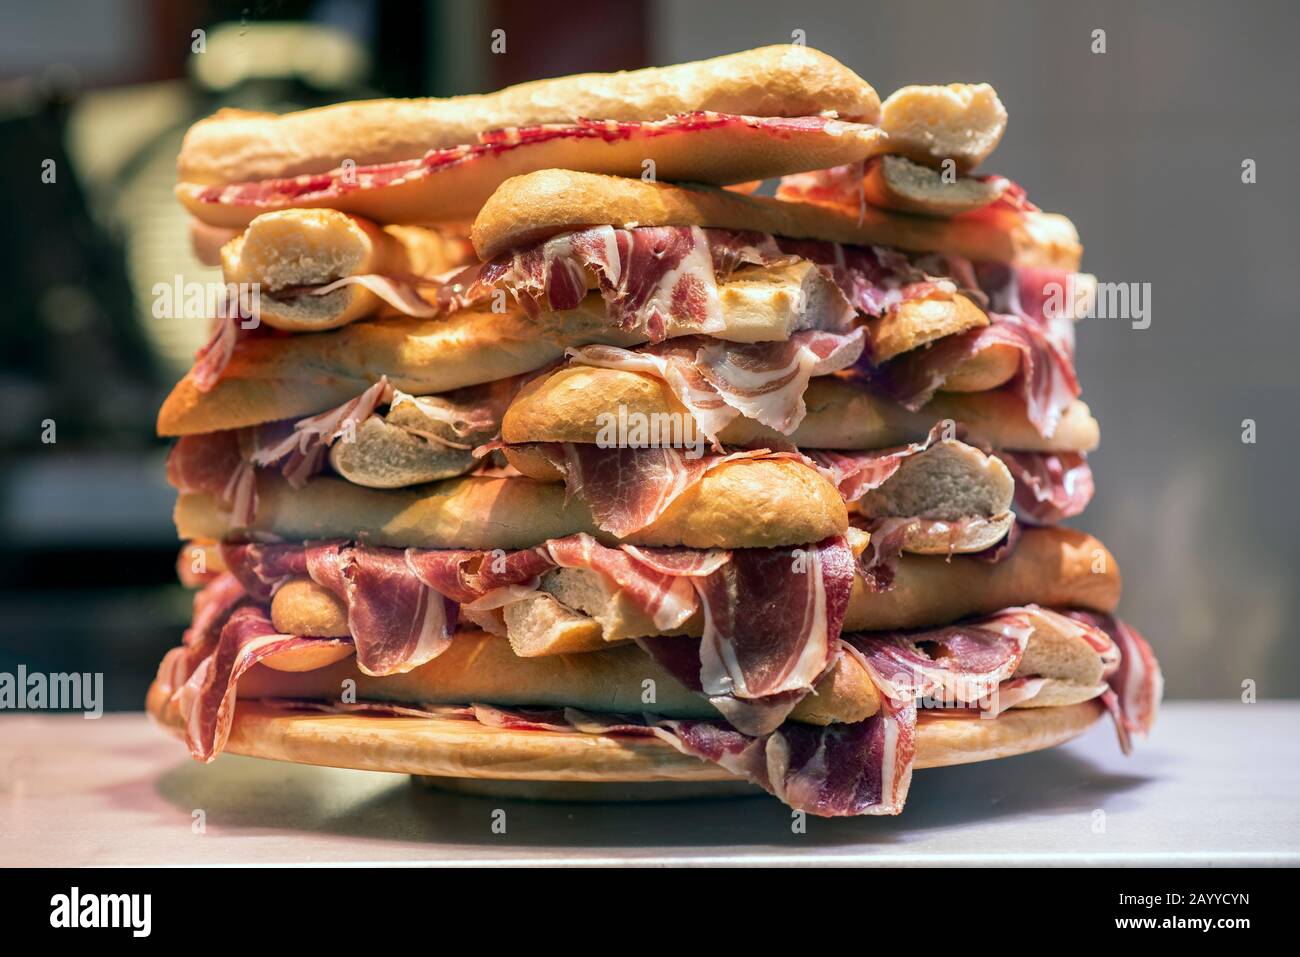 Plate with lots of Serrano ham sandwiches on top of each other Stock Photo